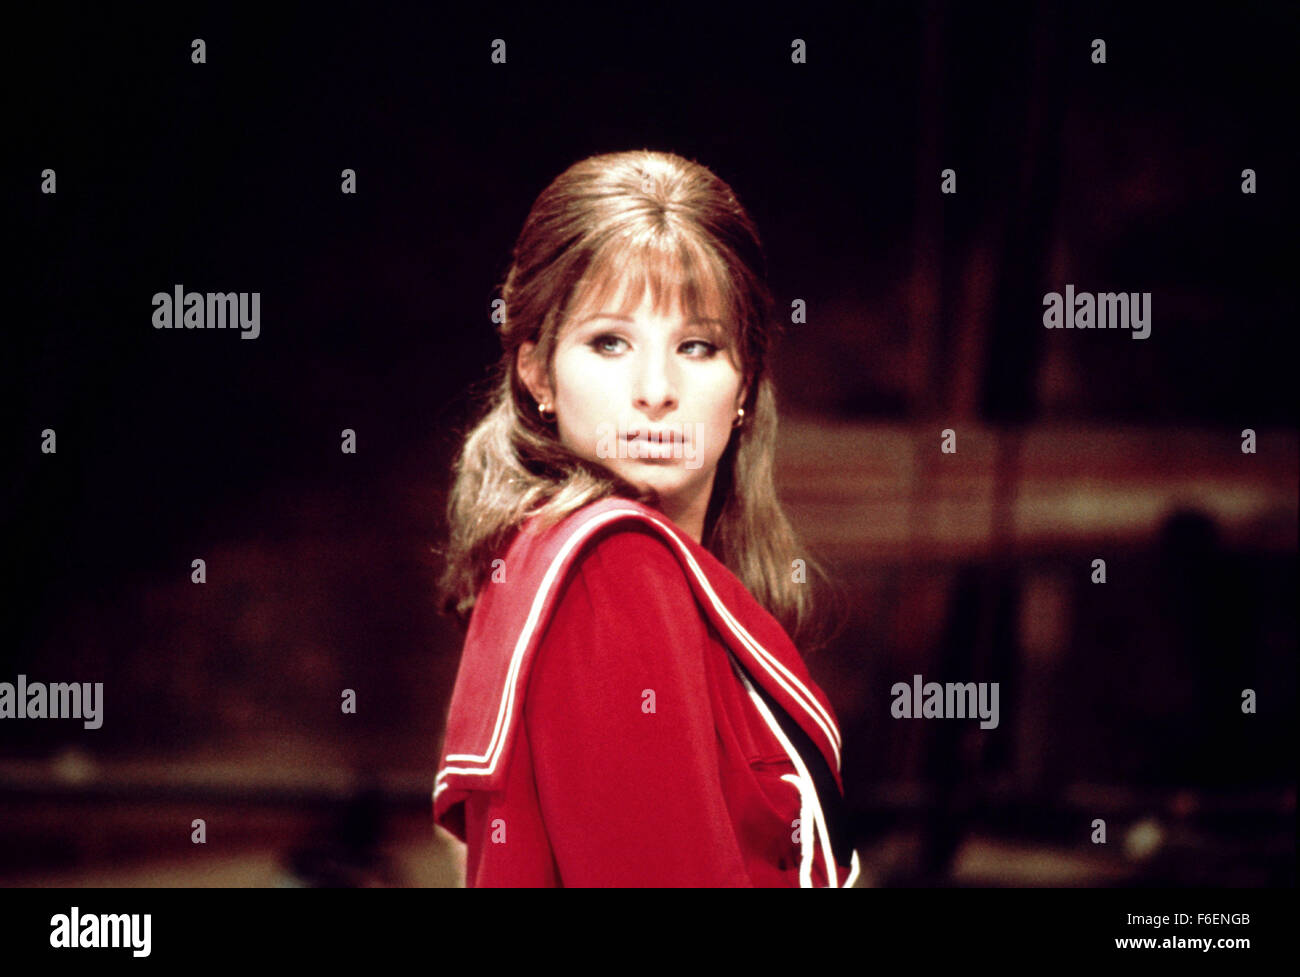 Apr 02, 1968; Hollywood, CA, USA; Actress BARBRA STREISAND stars as Fanny Brice in the romantic musical 'Funny Girl' directed by William Wyler. Stock Photo